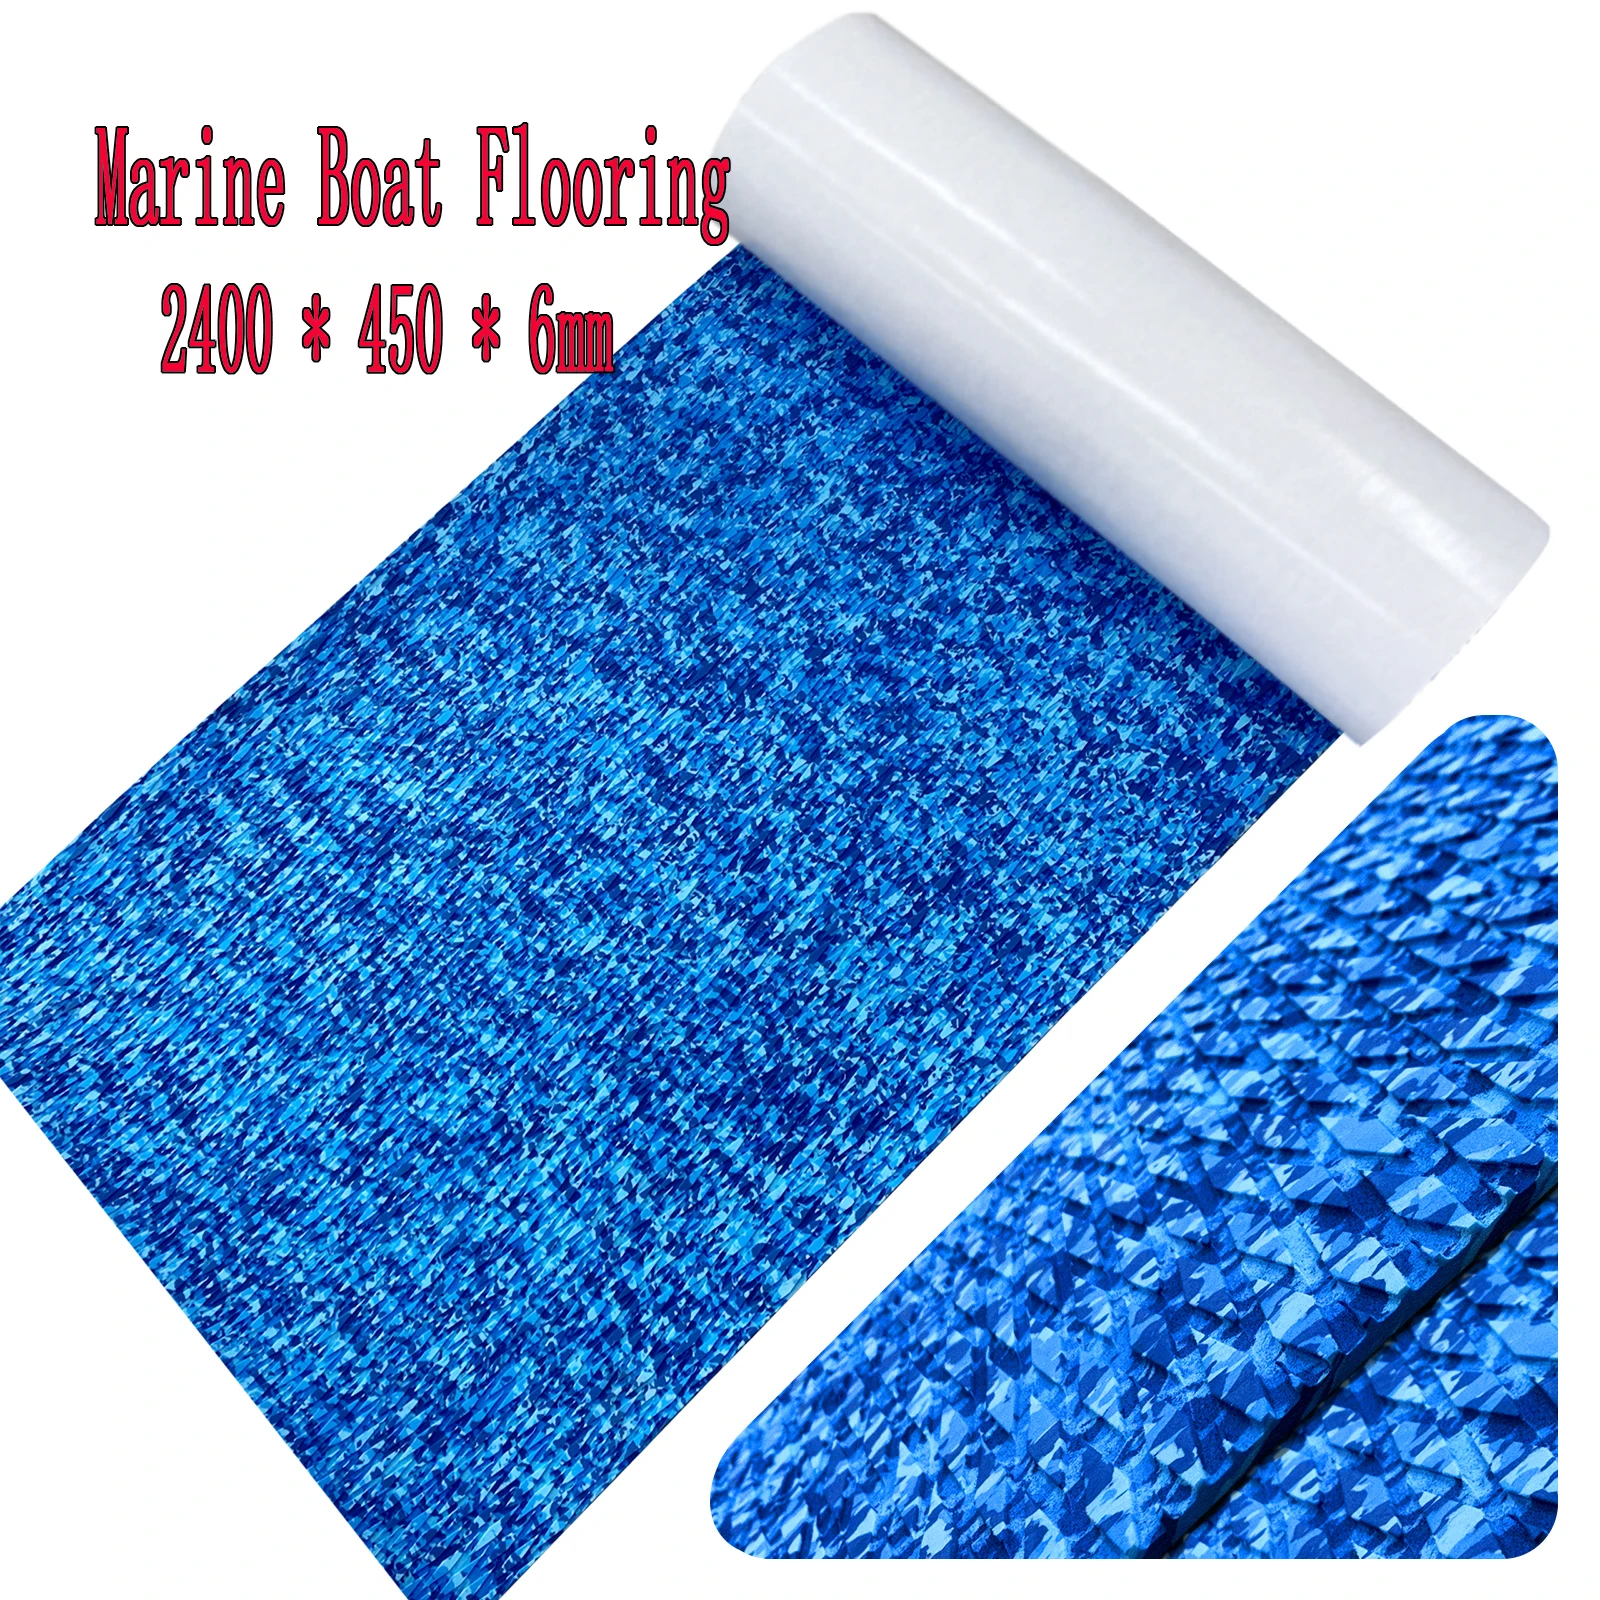 EVA Foam Boat Decking Sheet Camo Boat Flooring with Backing Adhesive/Marine Anti-Slip for Boats and Yachts Jet Ski Traction Mat